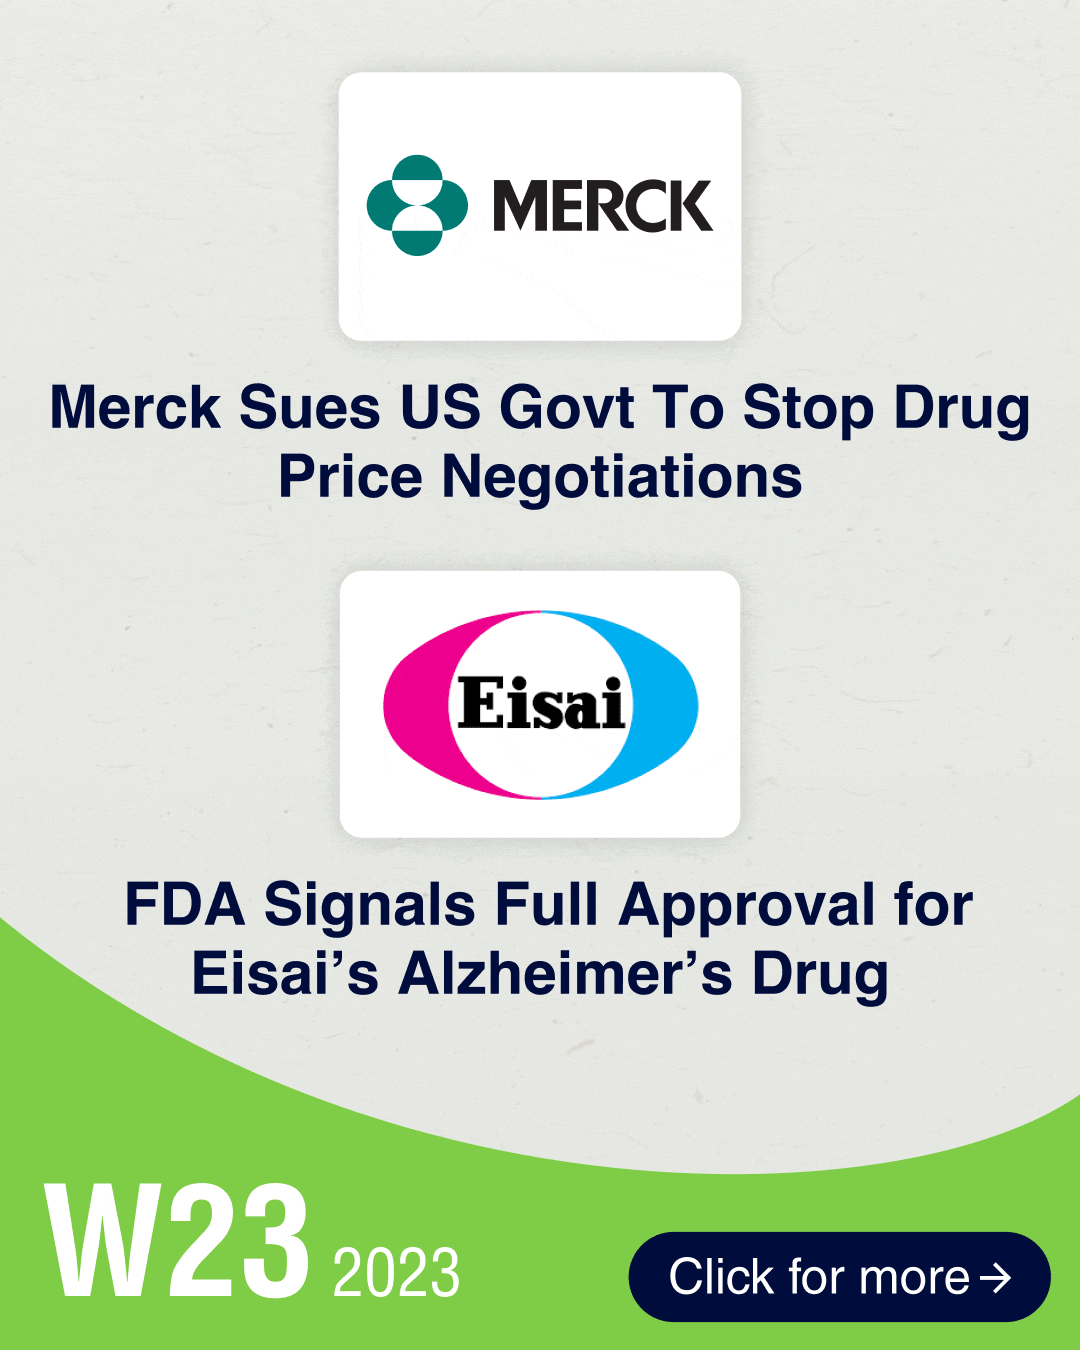 Merck sues US govt over IRA; FDA allows import of unapproved chemo drug from China to alleviate shortage